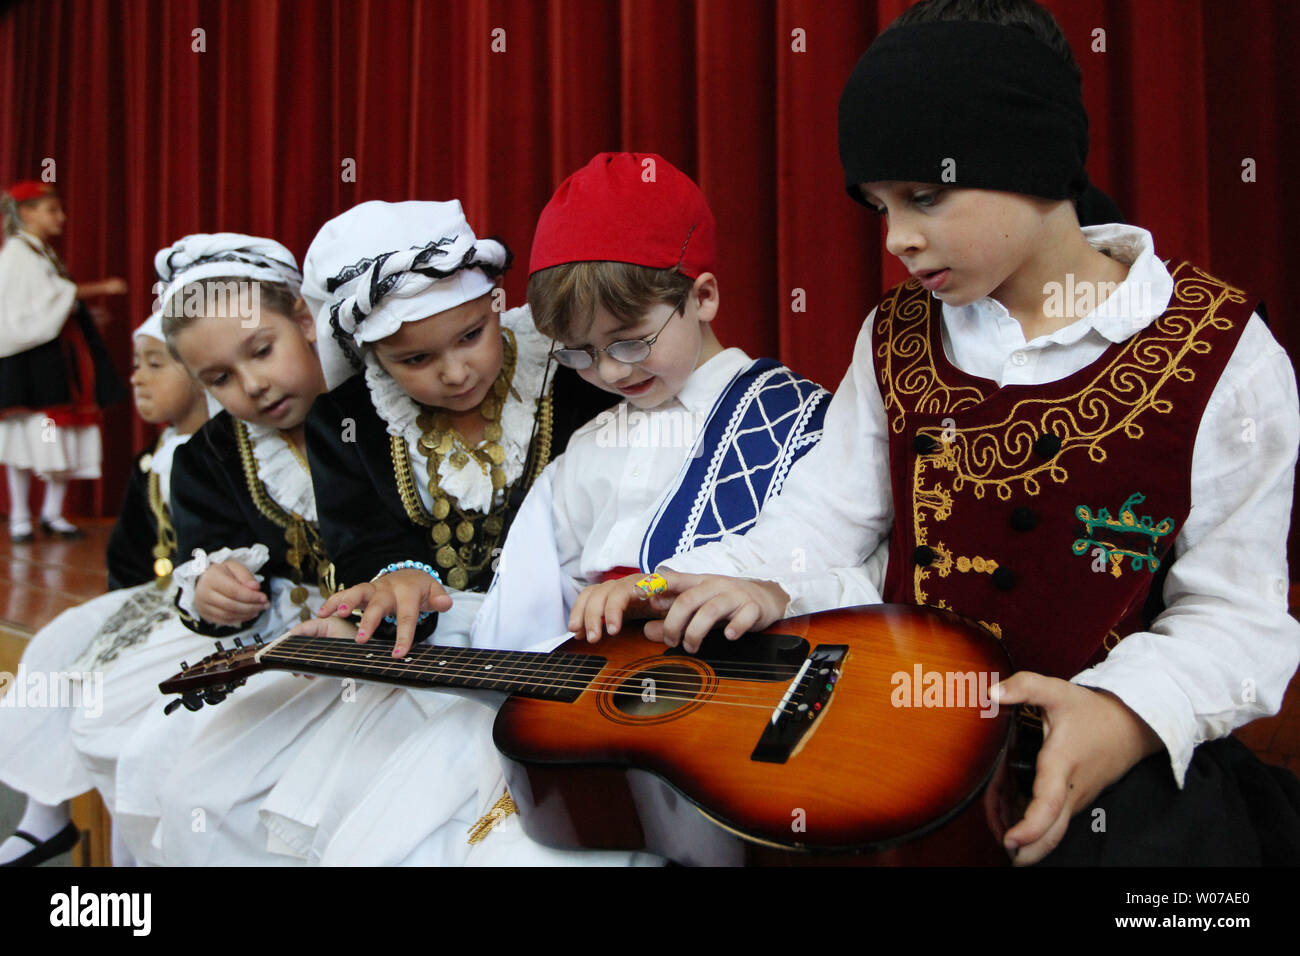 Children in traditional clothing play with a guitar before their turn to dance at the Greek Festival in St. Louis on September 2, 103. The annual festival drew record numbers for a single day due to the cooler weather. UPI/Bill Greenblatt Stock Photo